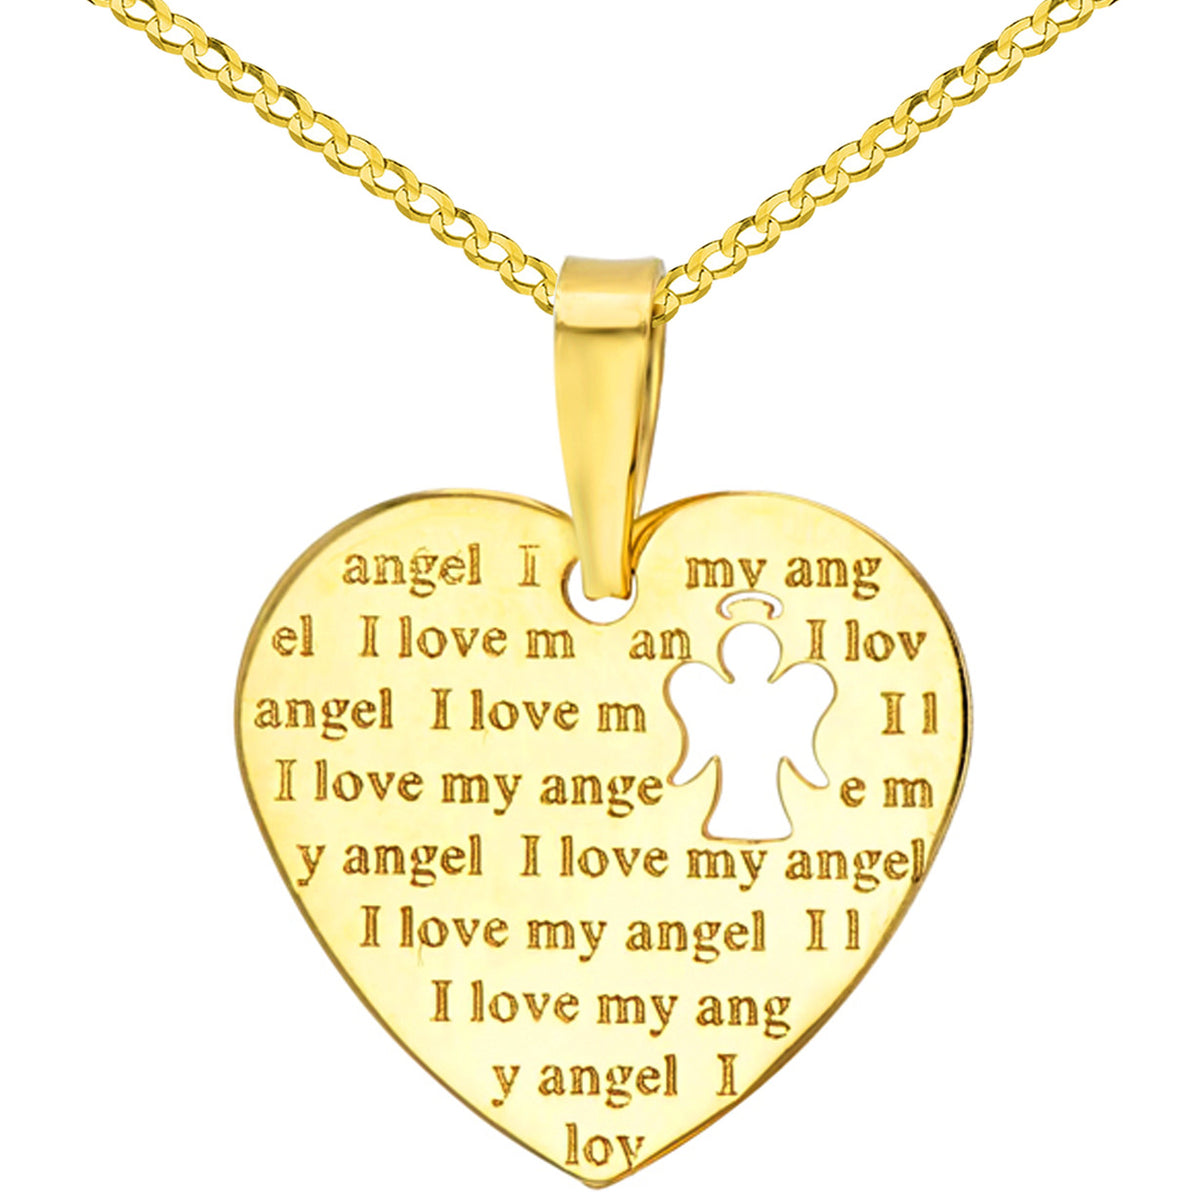 14K Yellow Gold Heart Charm with I Love My Angel Script Pendant Cuban Chain Necklace